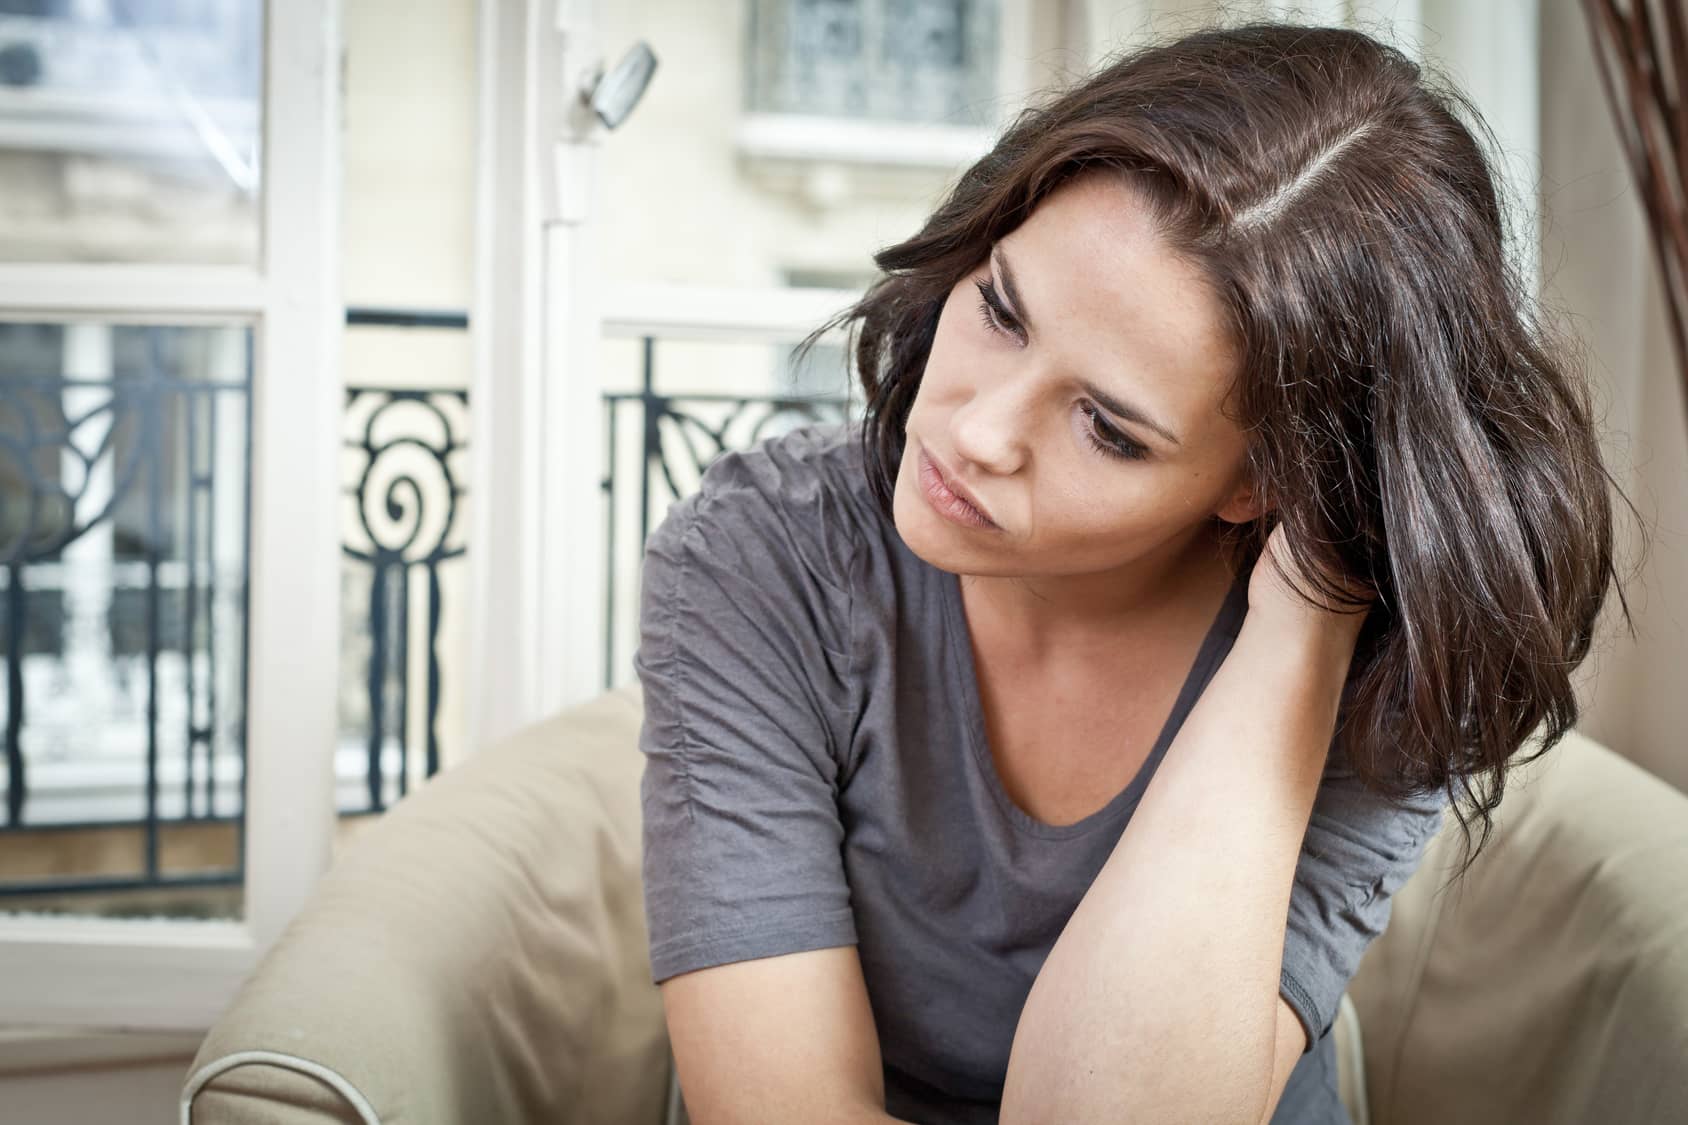 Could you be suffering from Generalised Anxiety Disorder?